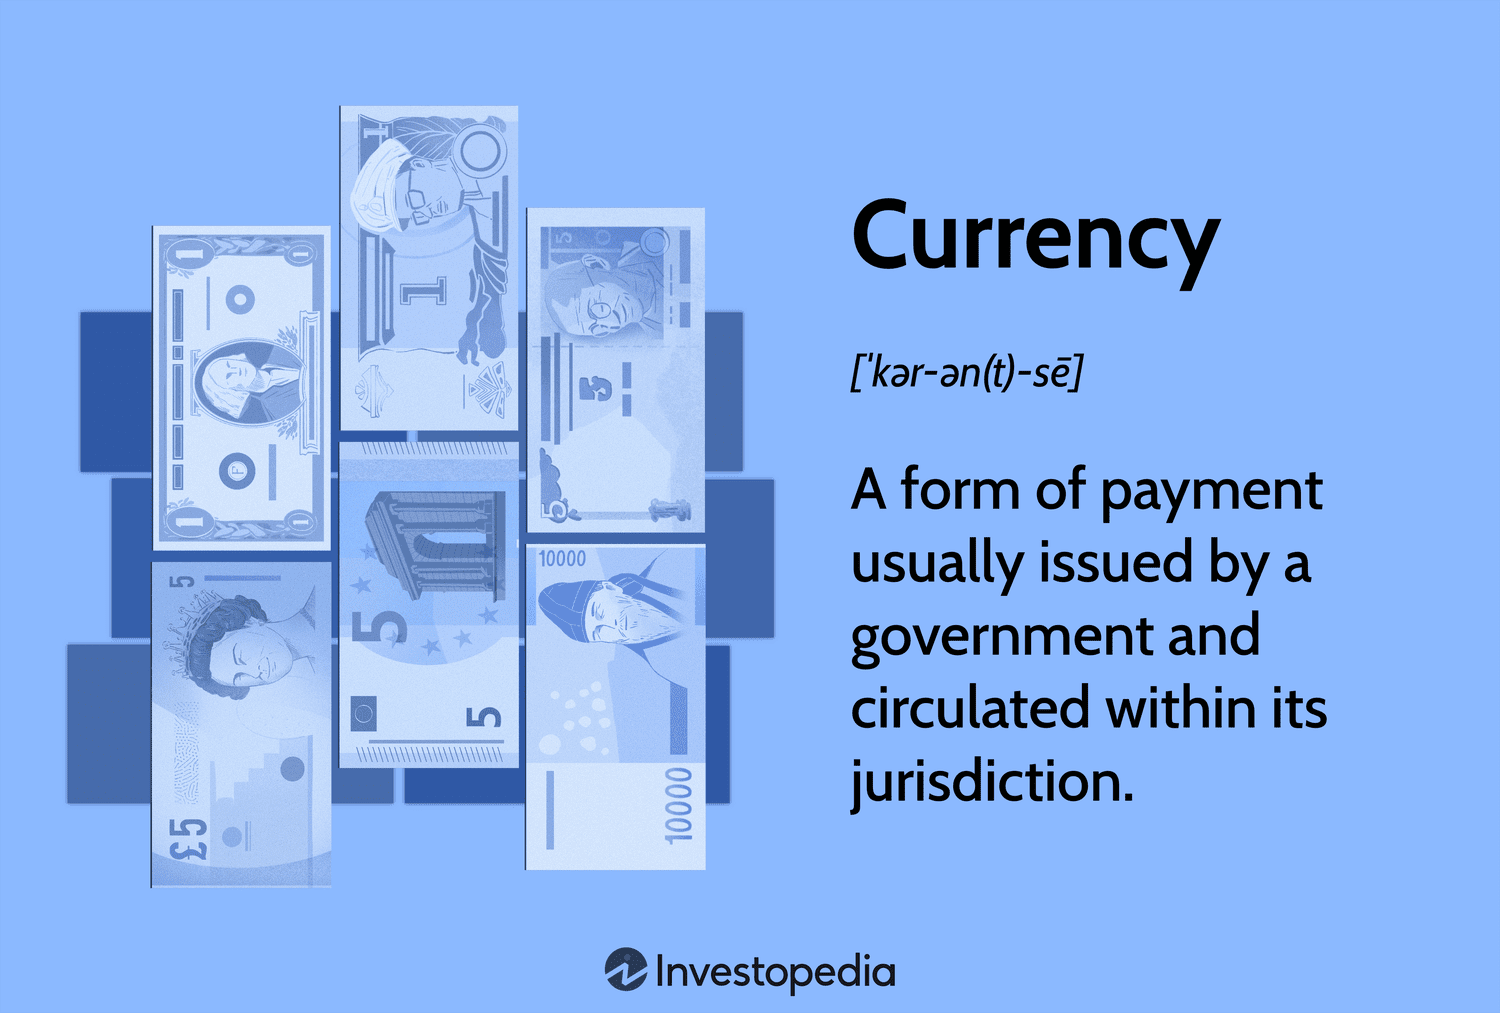 What is Currency?